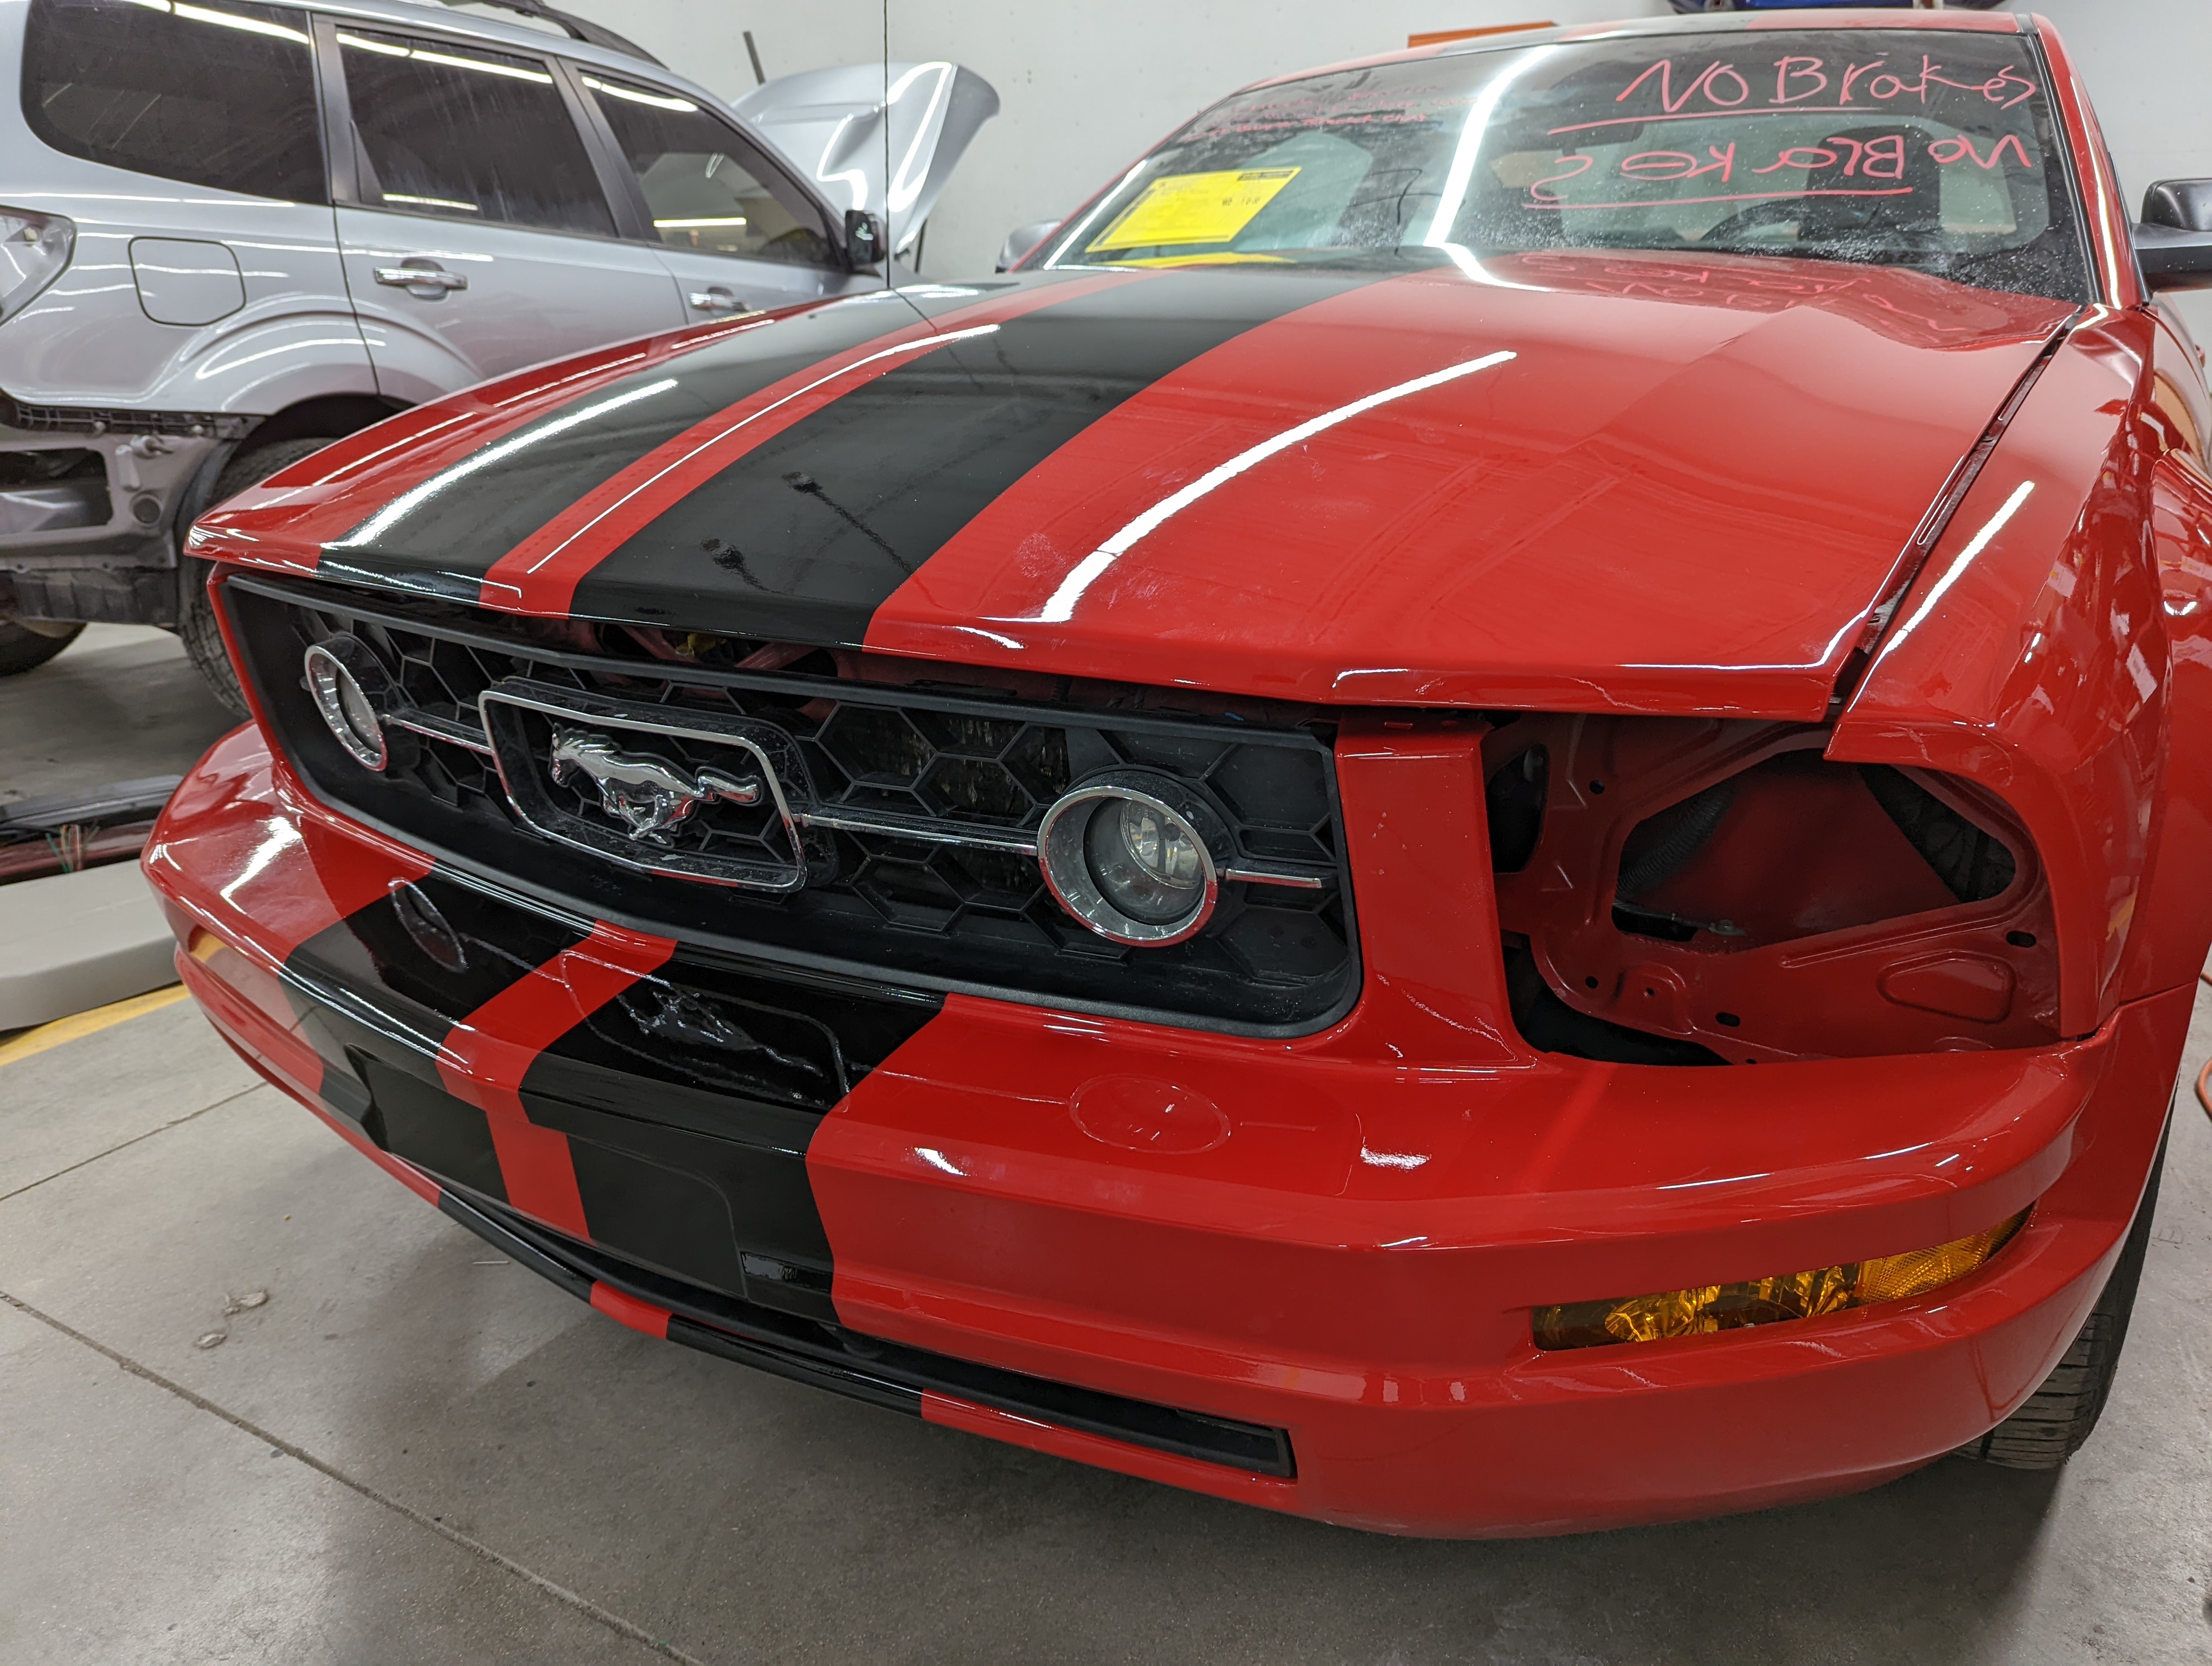 2006 Ford Mustang Vinyl Stripes. Finished product.